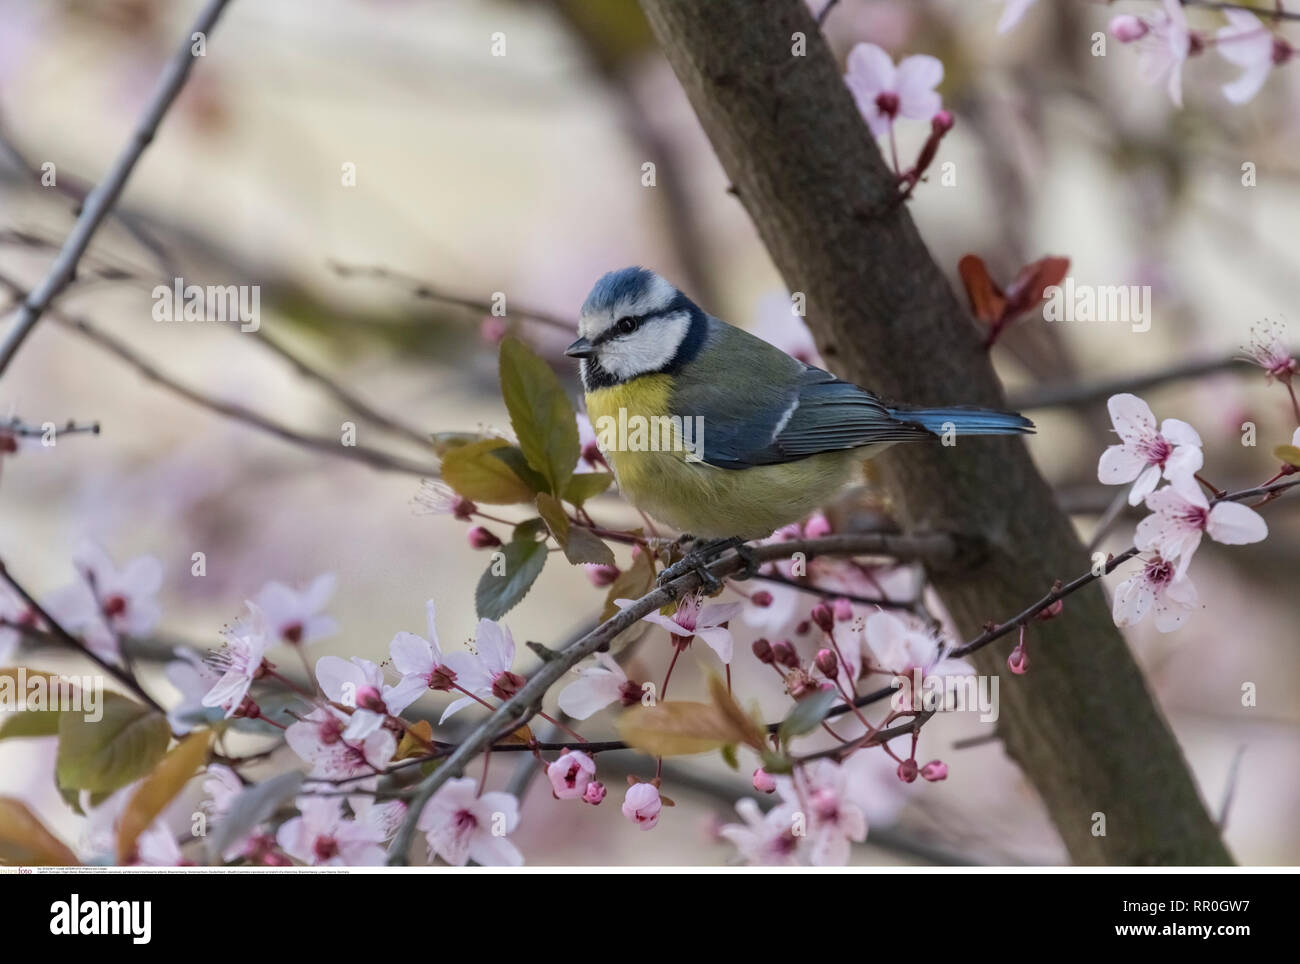 Bluetit (Cyanistes caeruleus) on branch of a cherry tree, Braunschweig, Lower Saxony, Germany, Additional-Rights-Clearance-Info-Not-Available Stock Photo